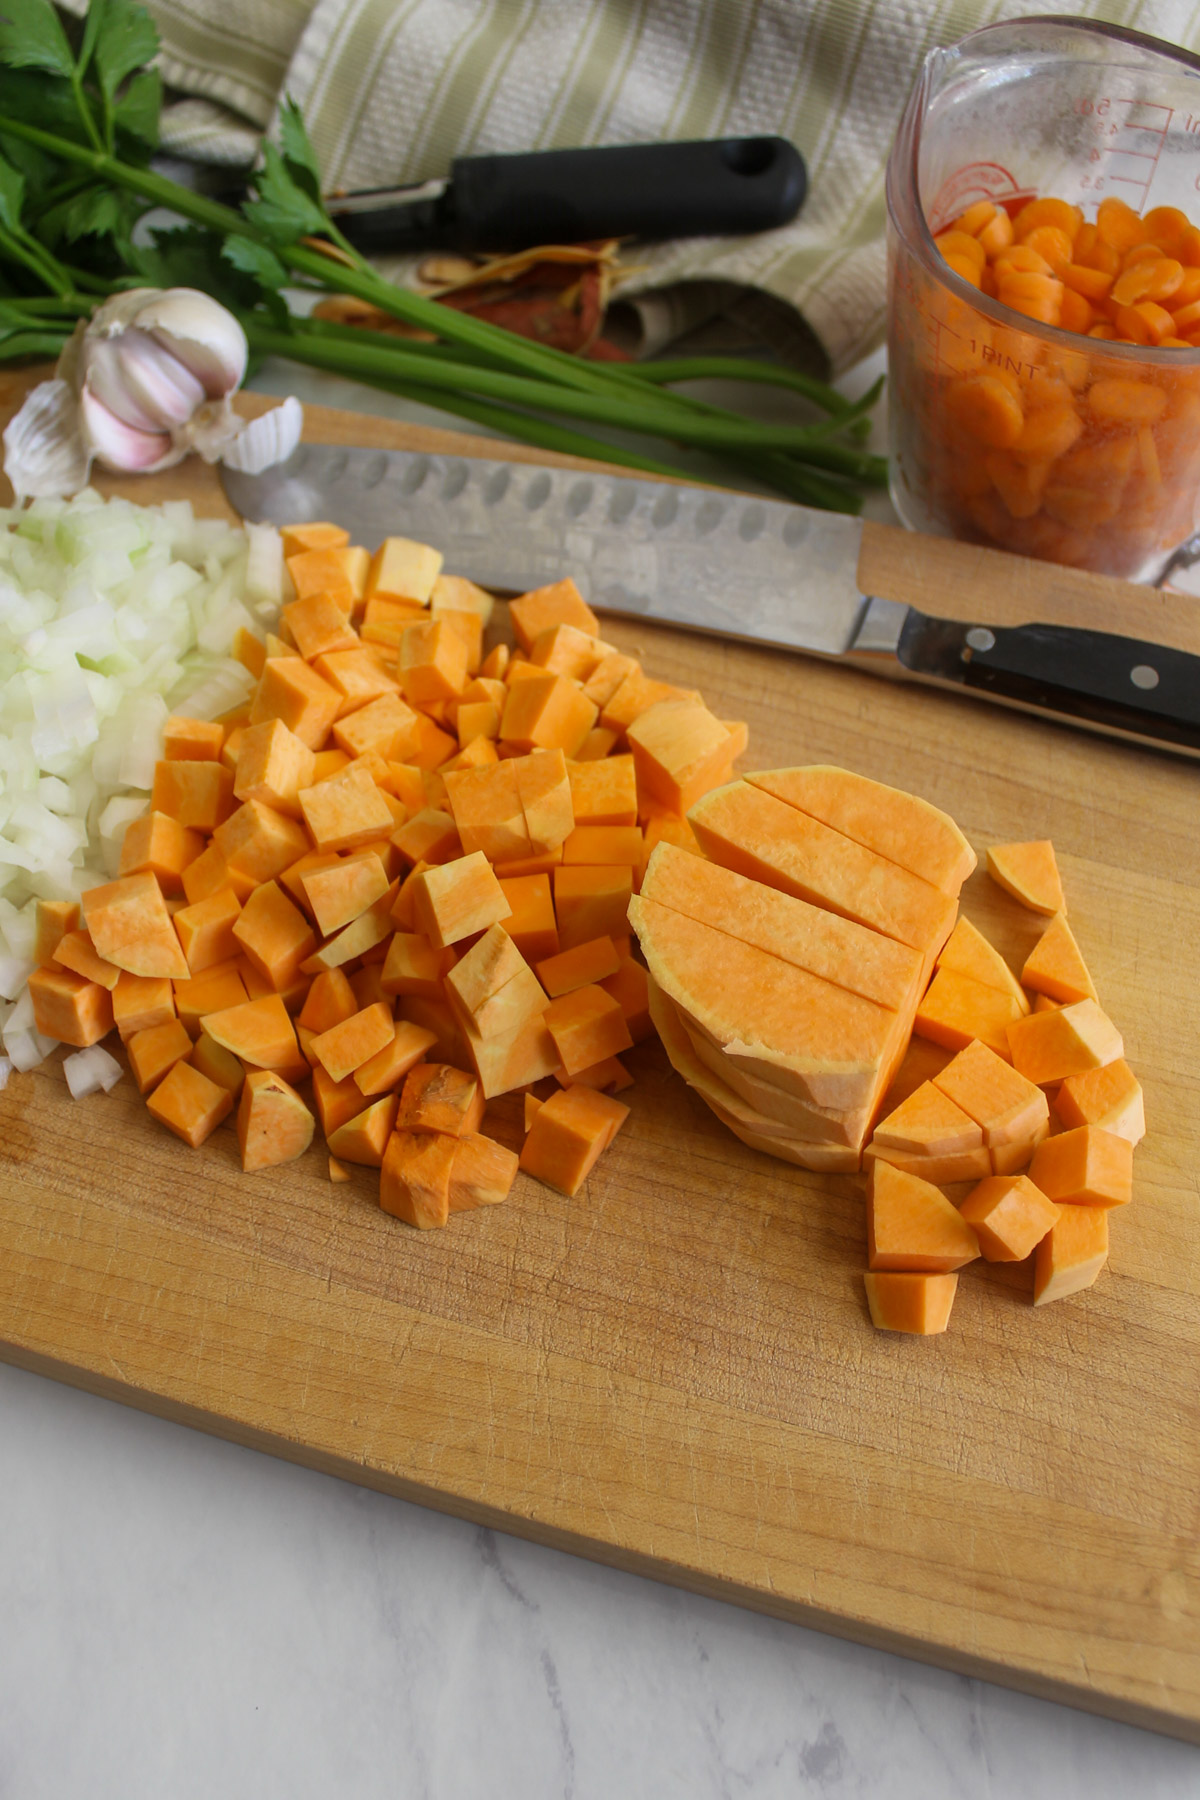 Chopped sweet potato, and onion on a cutting board with carrot, celery and garlic.